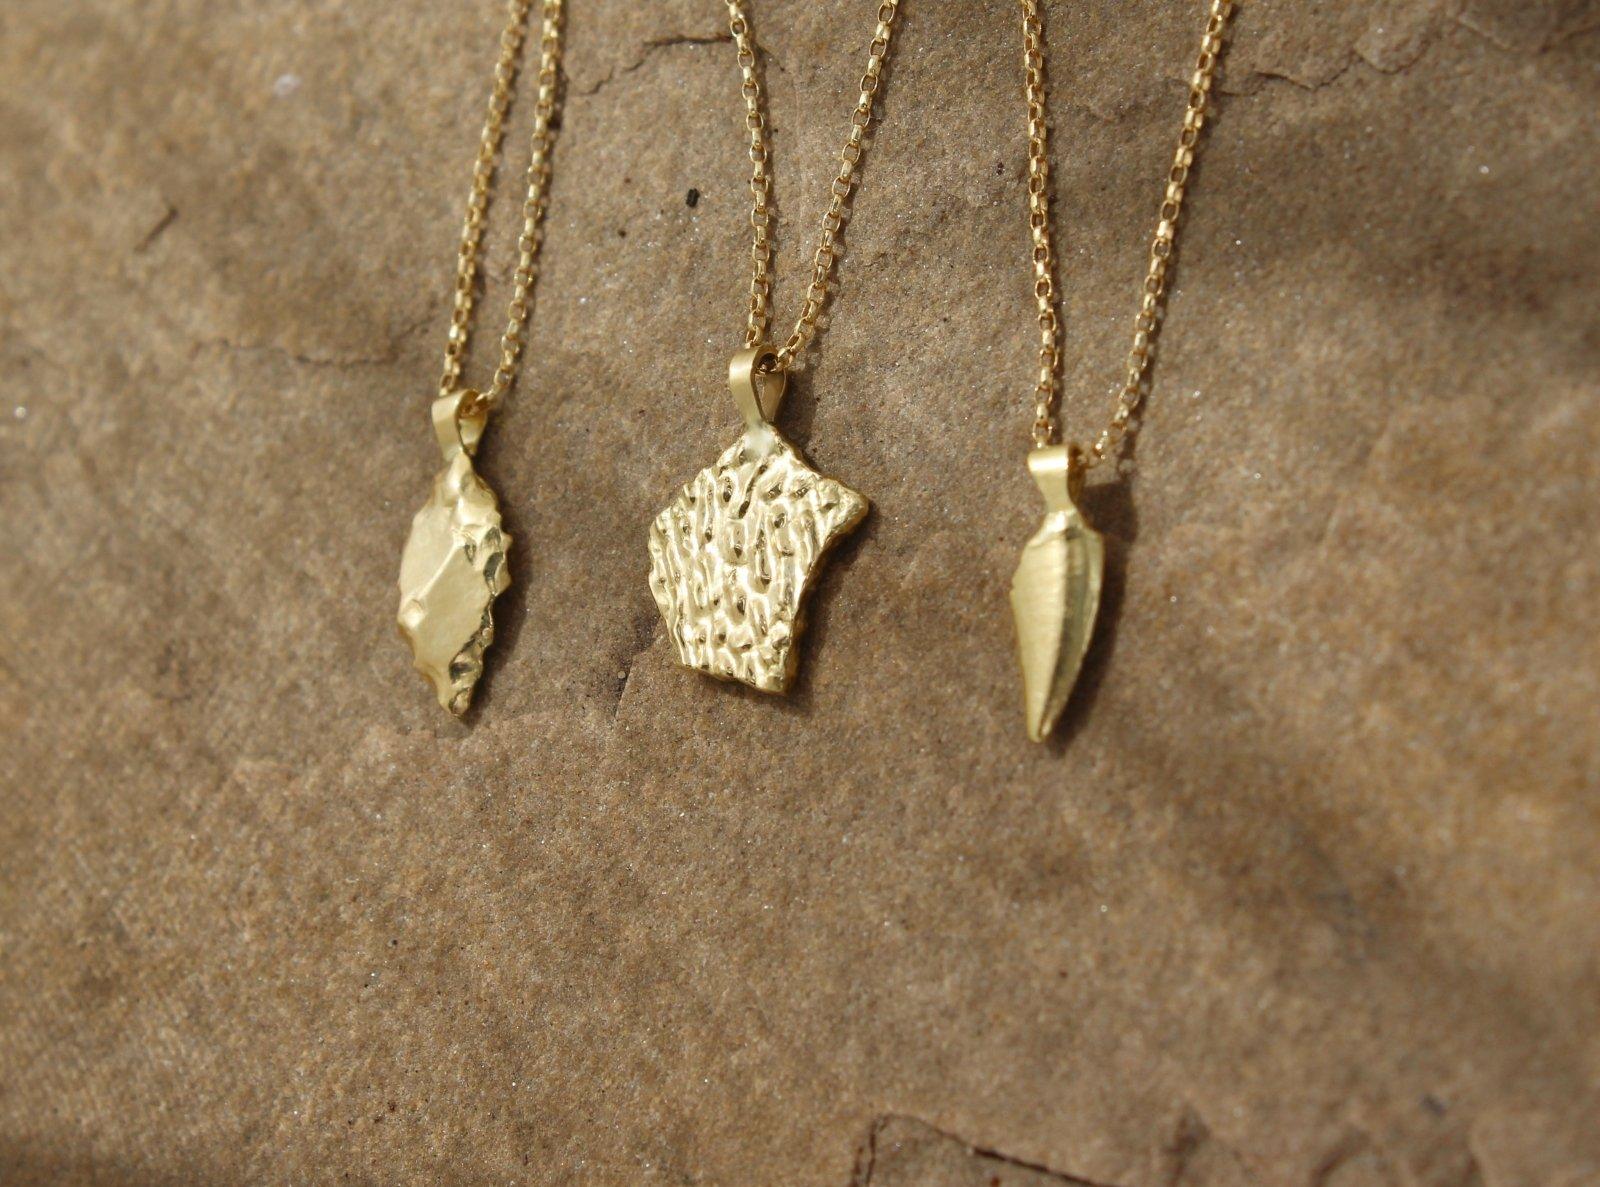 Neolithic Arrowhead Necklace - 9ct Gold - Brotheridge